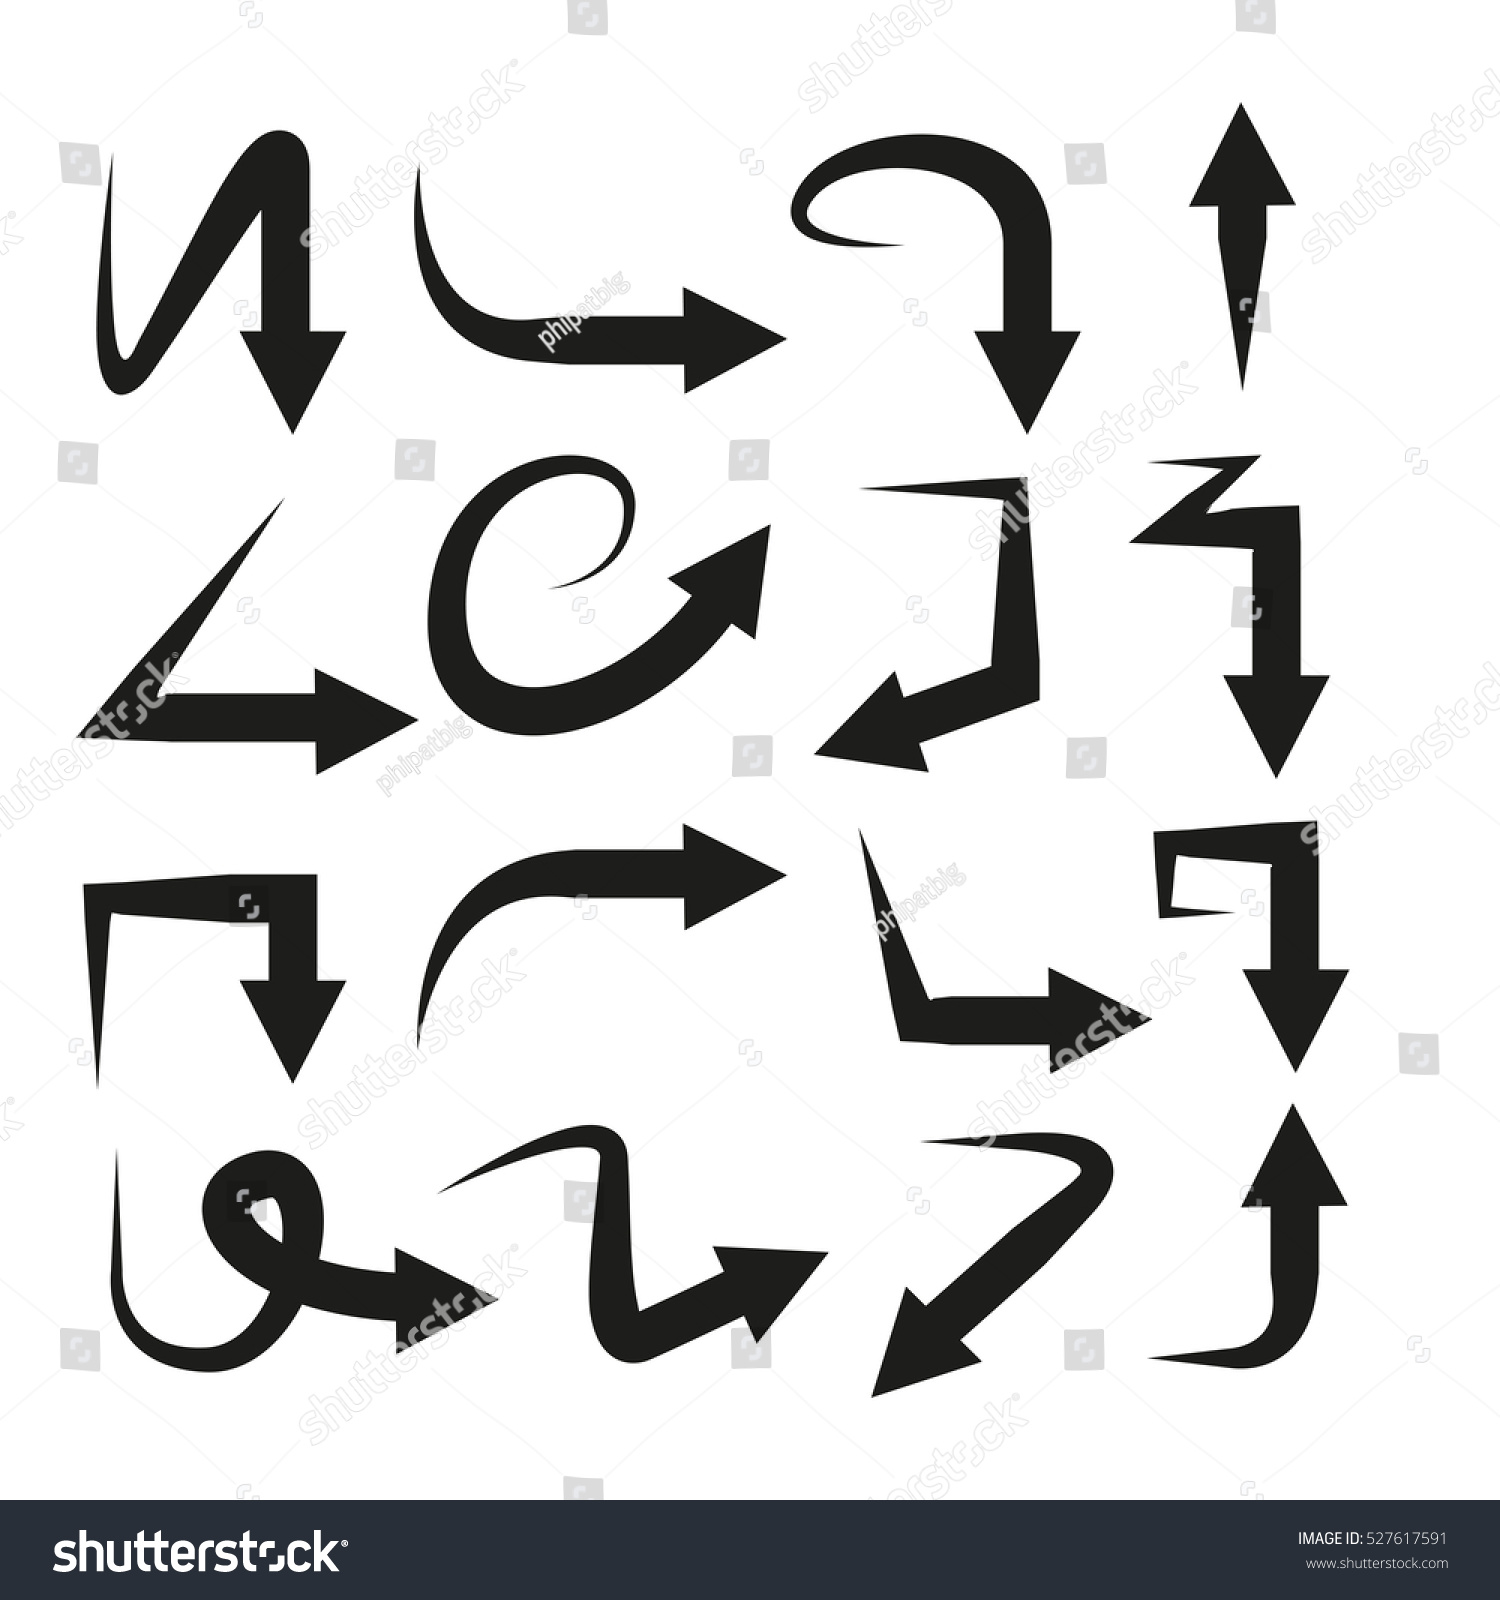 Vector Of Curved Arrow Icons - 527617591 : Shutterstock